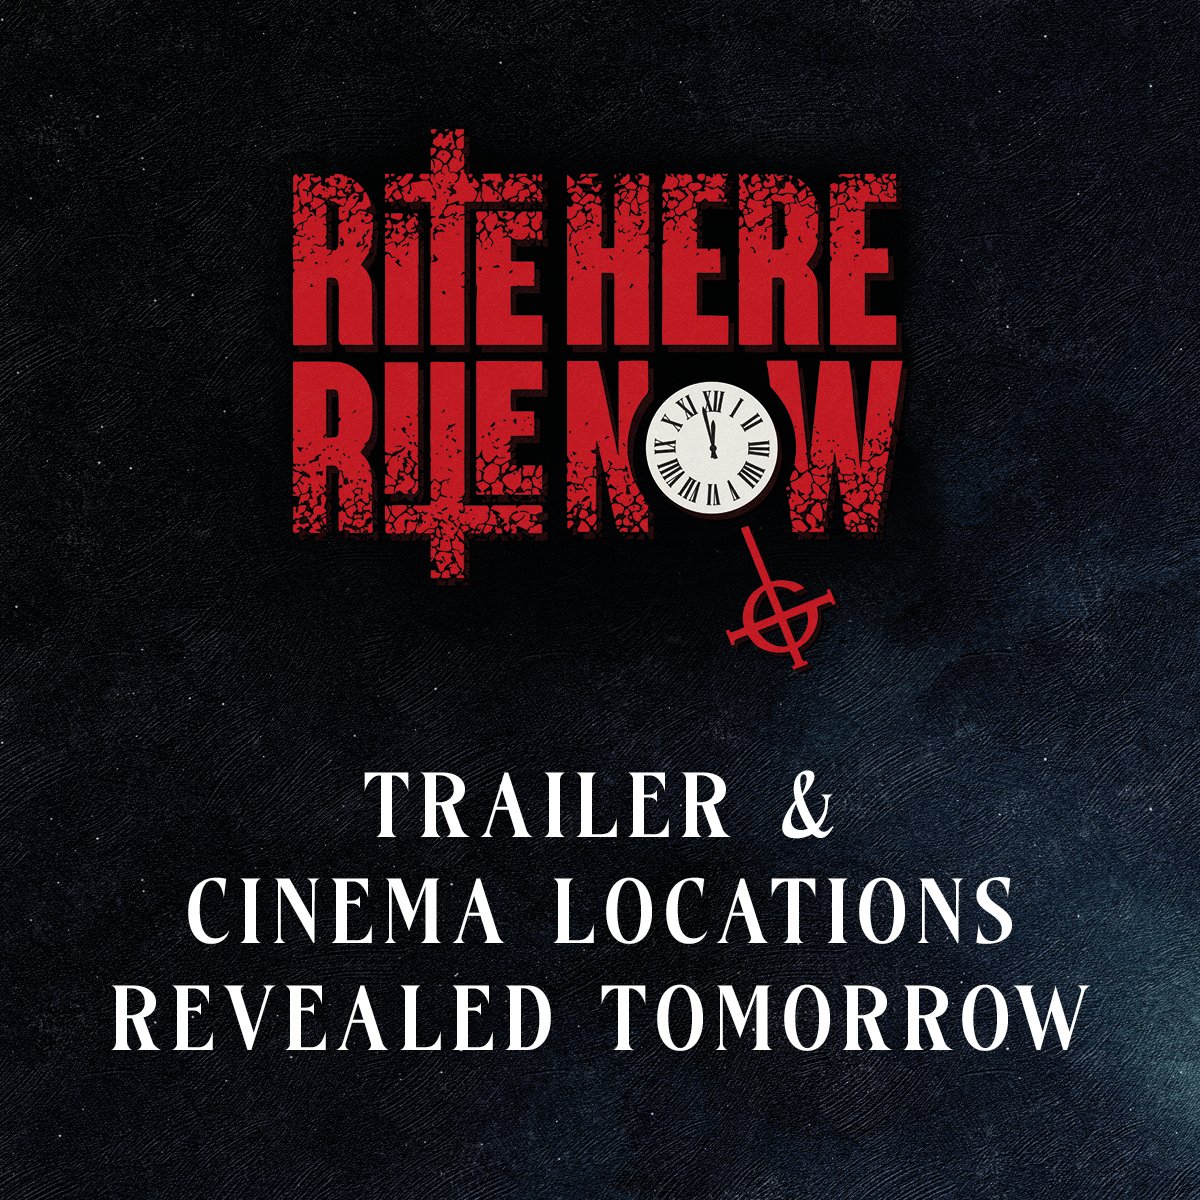 [MESSAGE FROM THE CLERGY] We wish to inform you that the official film trailer for RITE HERE RITE NOW will be launched tomorrow at 6am PDT / 9am EDT / 2pm BST. Join the worldwide premiere on YouTube. Full cinema locations and pre-sale links will also be revealed at